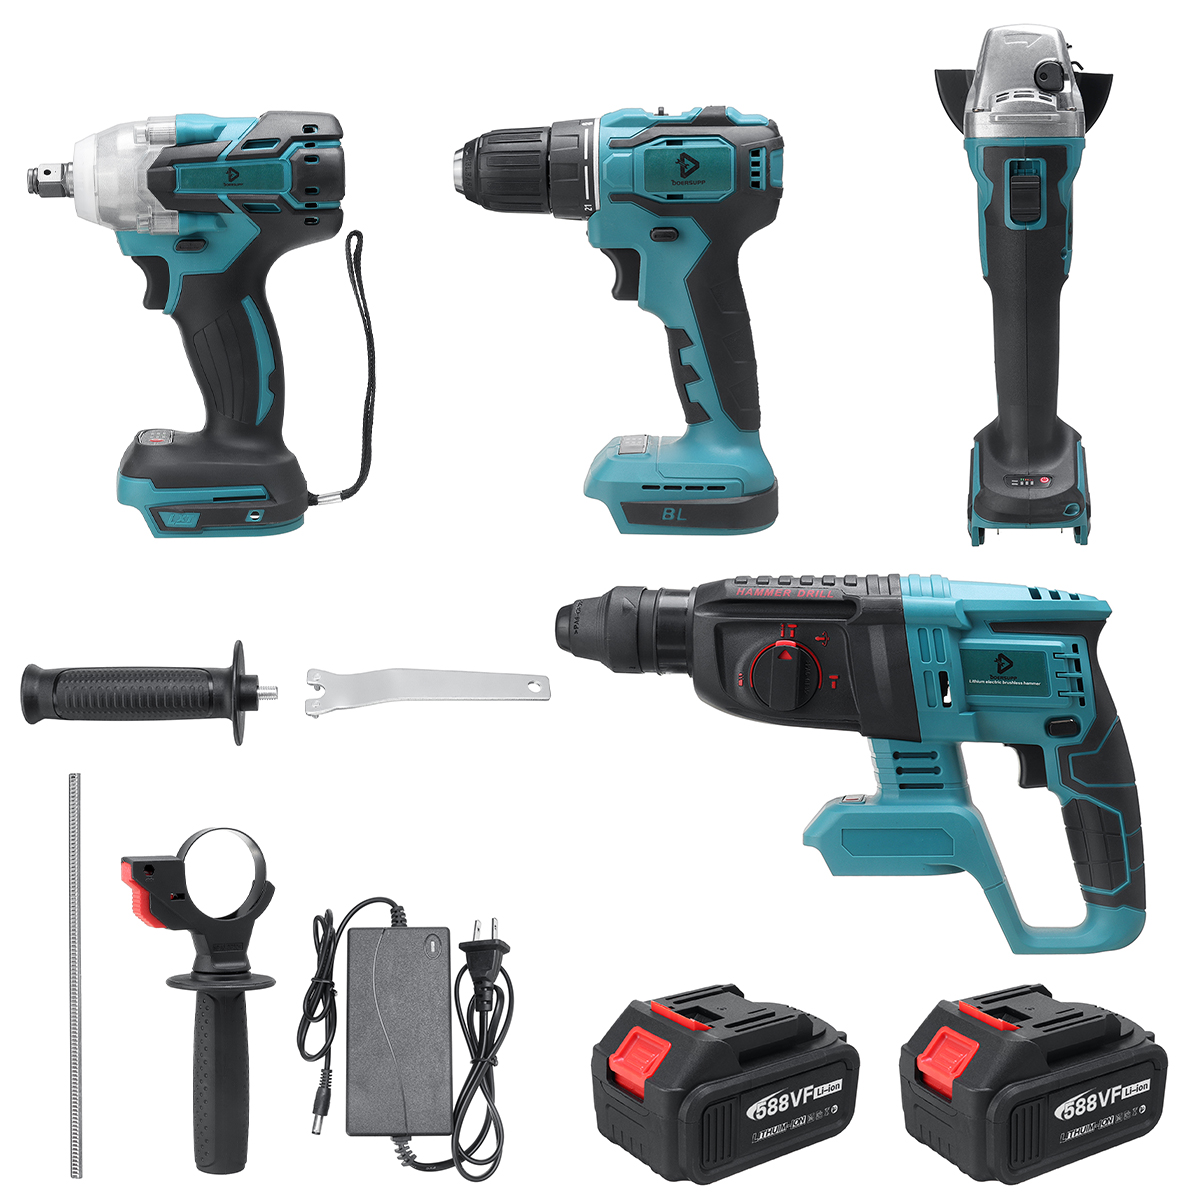 Find Doersupp 588VF 4Pcs Li ion Battery Power Tool Set Angle Grinder Cordless Drill Hammer Electric Wrench Fit Makita for Sale on Gipsybee.com with cryptocurrencies